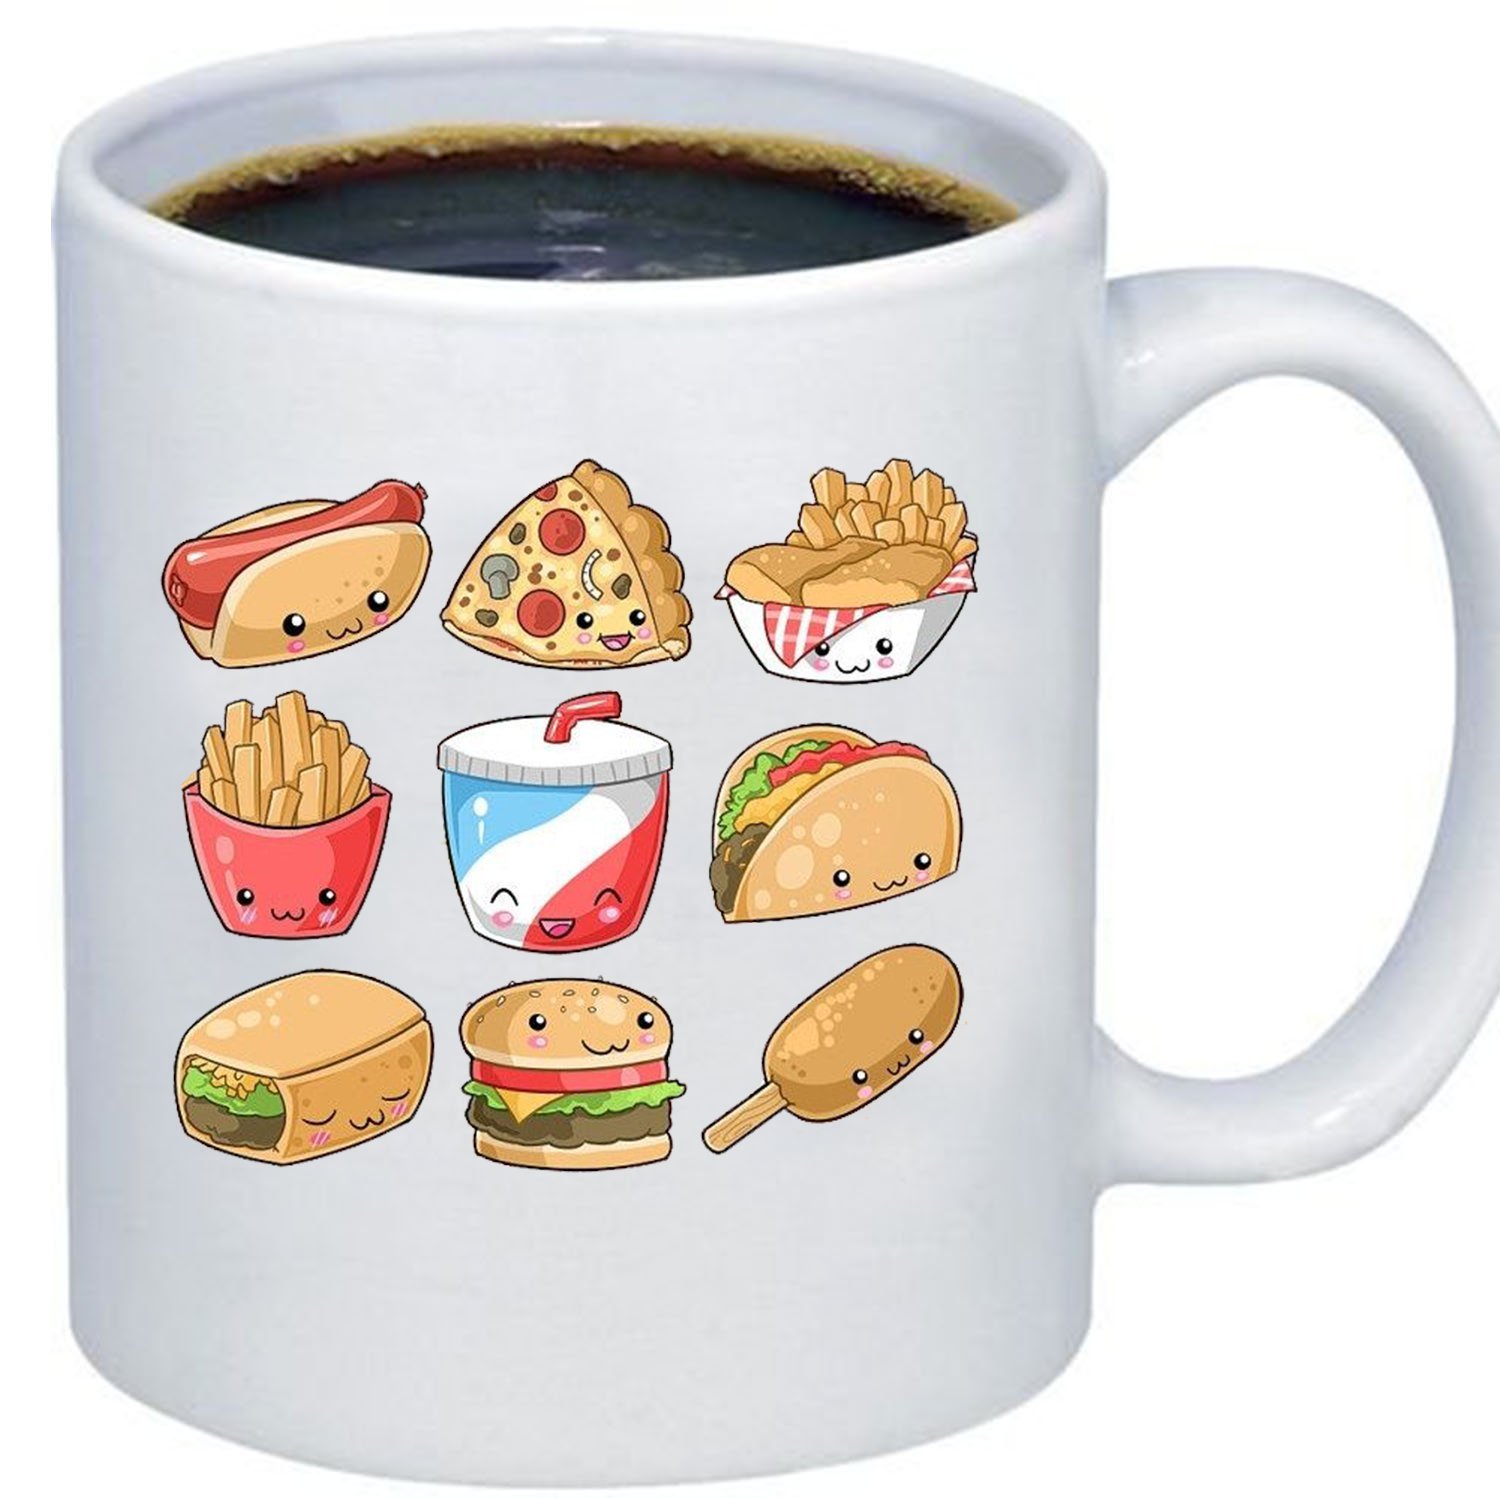 Coffee mug clipart cute pictures on Cliparts Pub 2020! 🔝